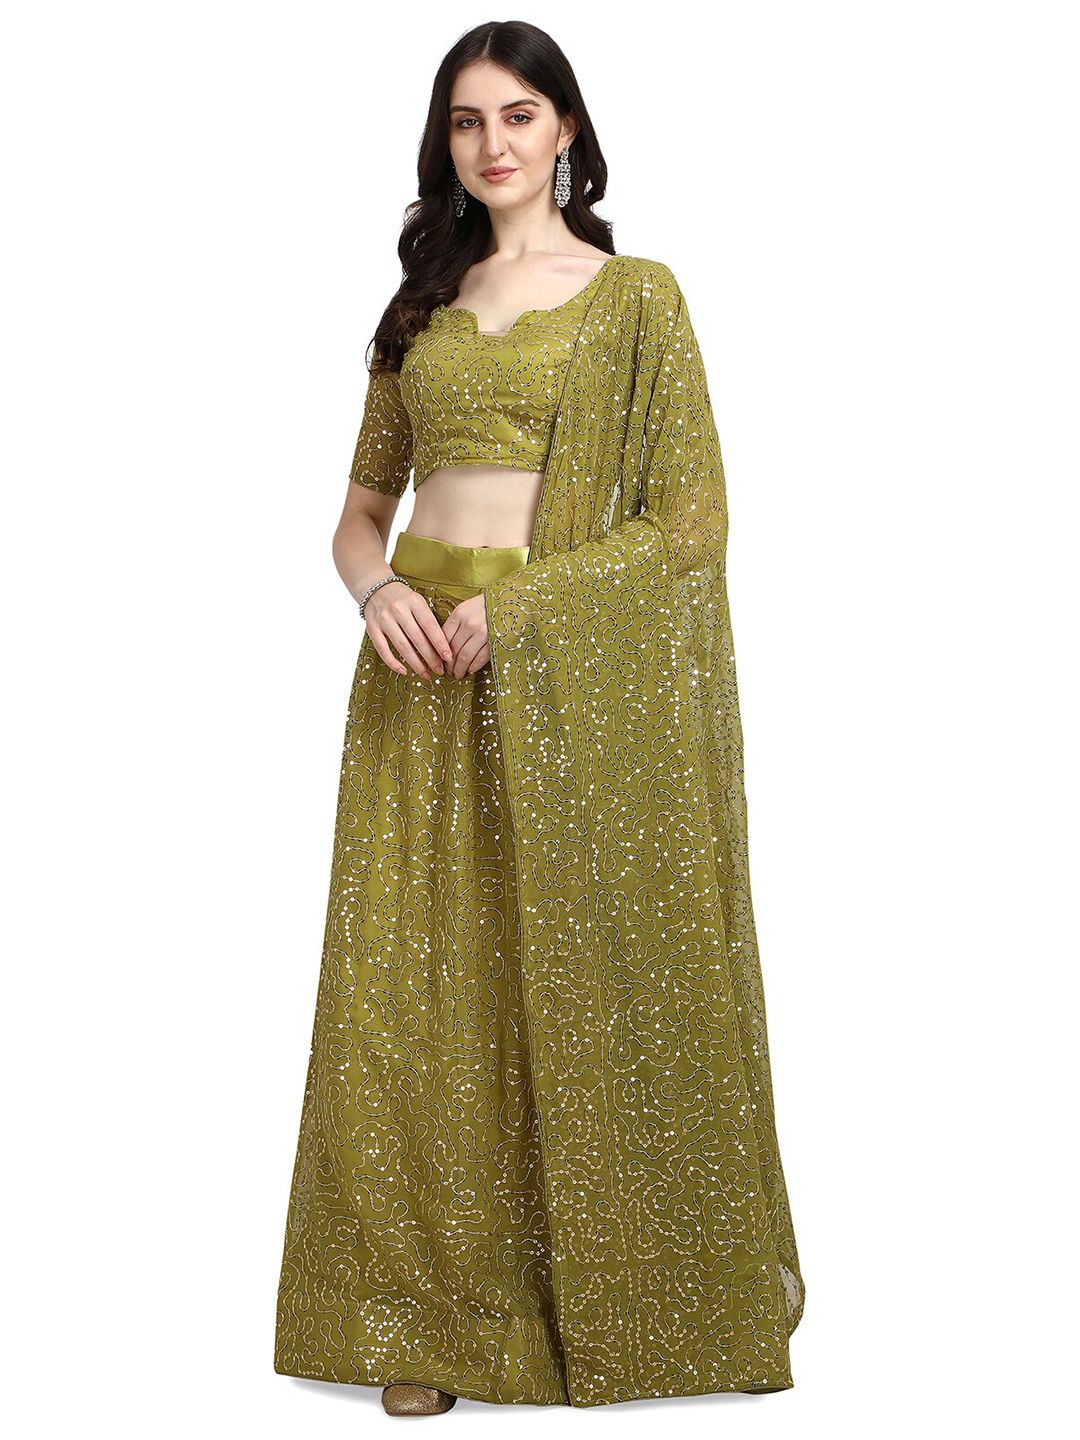 Pratham Blue Woman Olive Green & Silver-Toned Embellished Sequinned Semi-Stitched Lehenga Price in India